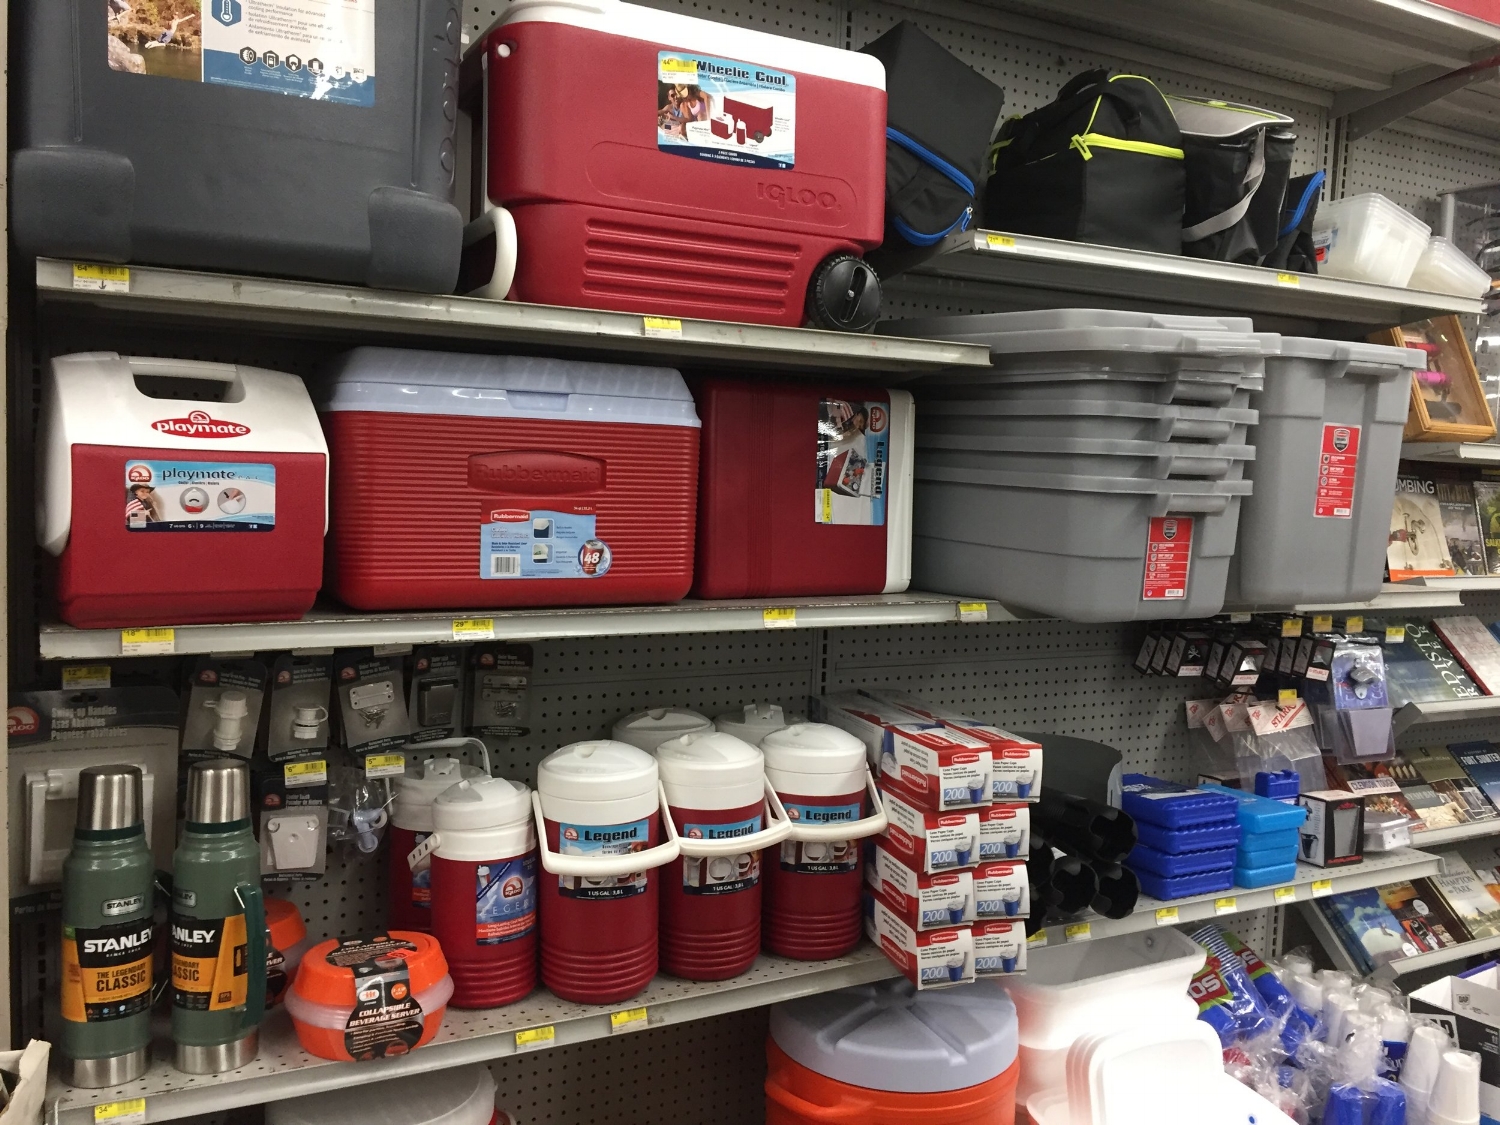   Coolers &amp; Hot Weather Supplies  